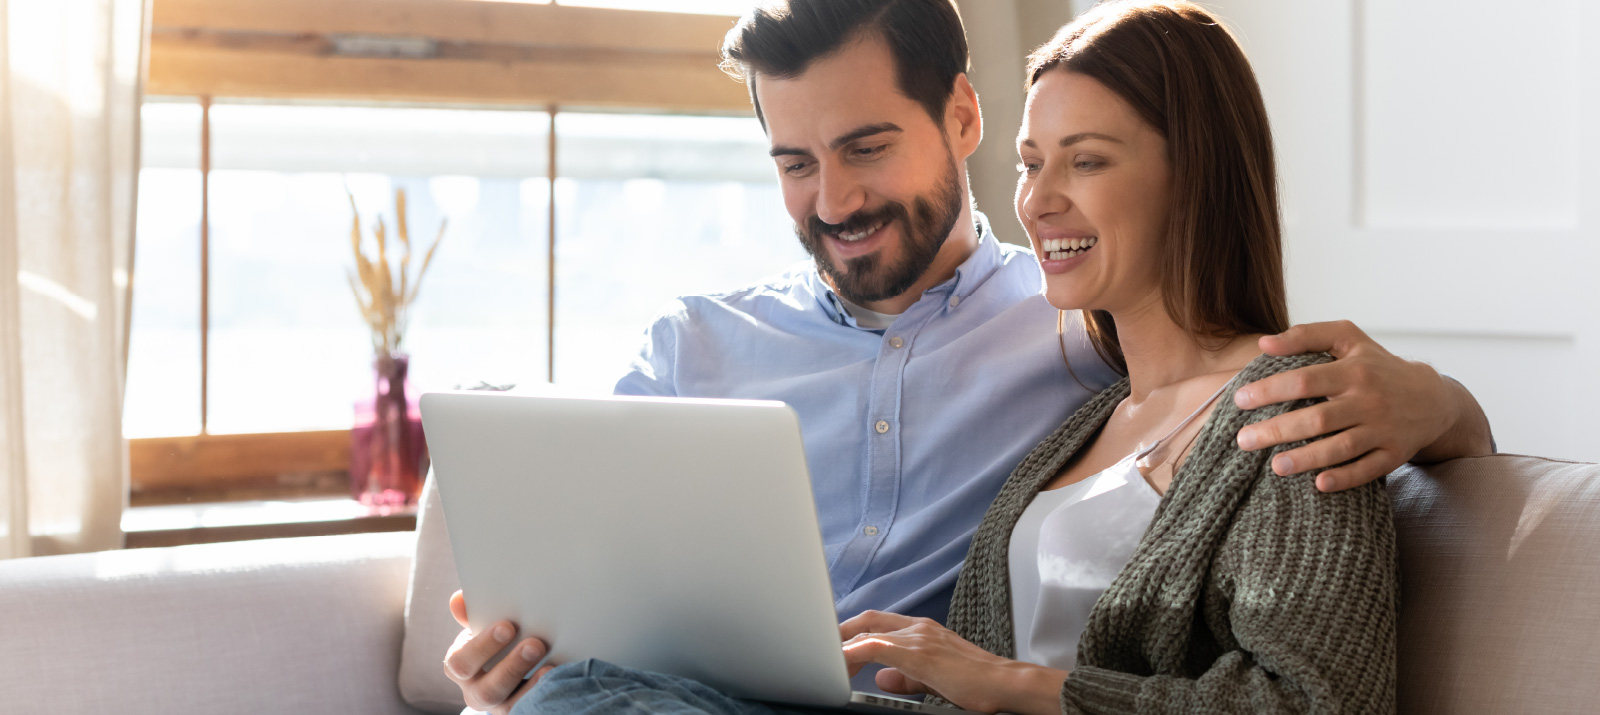 Couple sitting on couch looking at laptop smiling